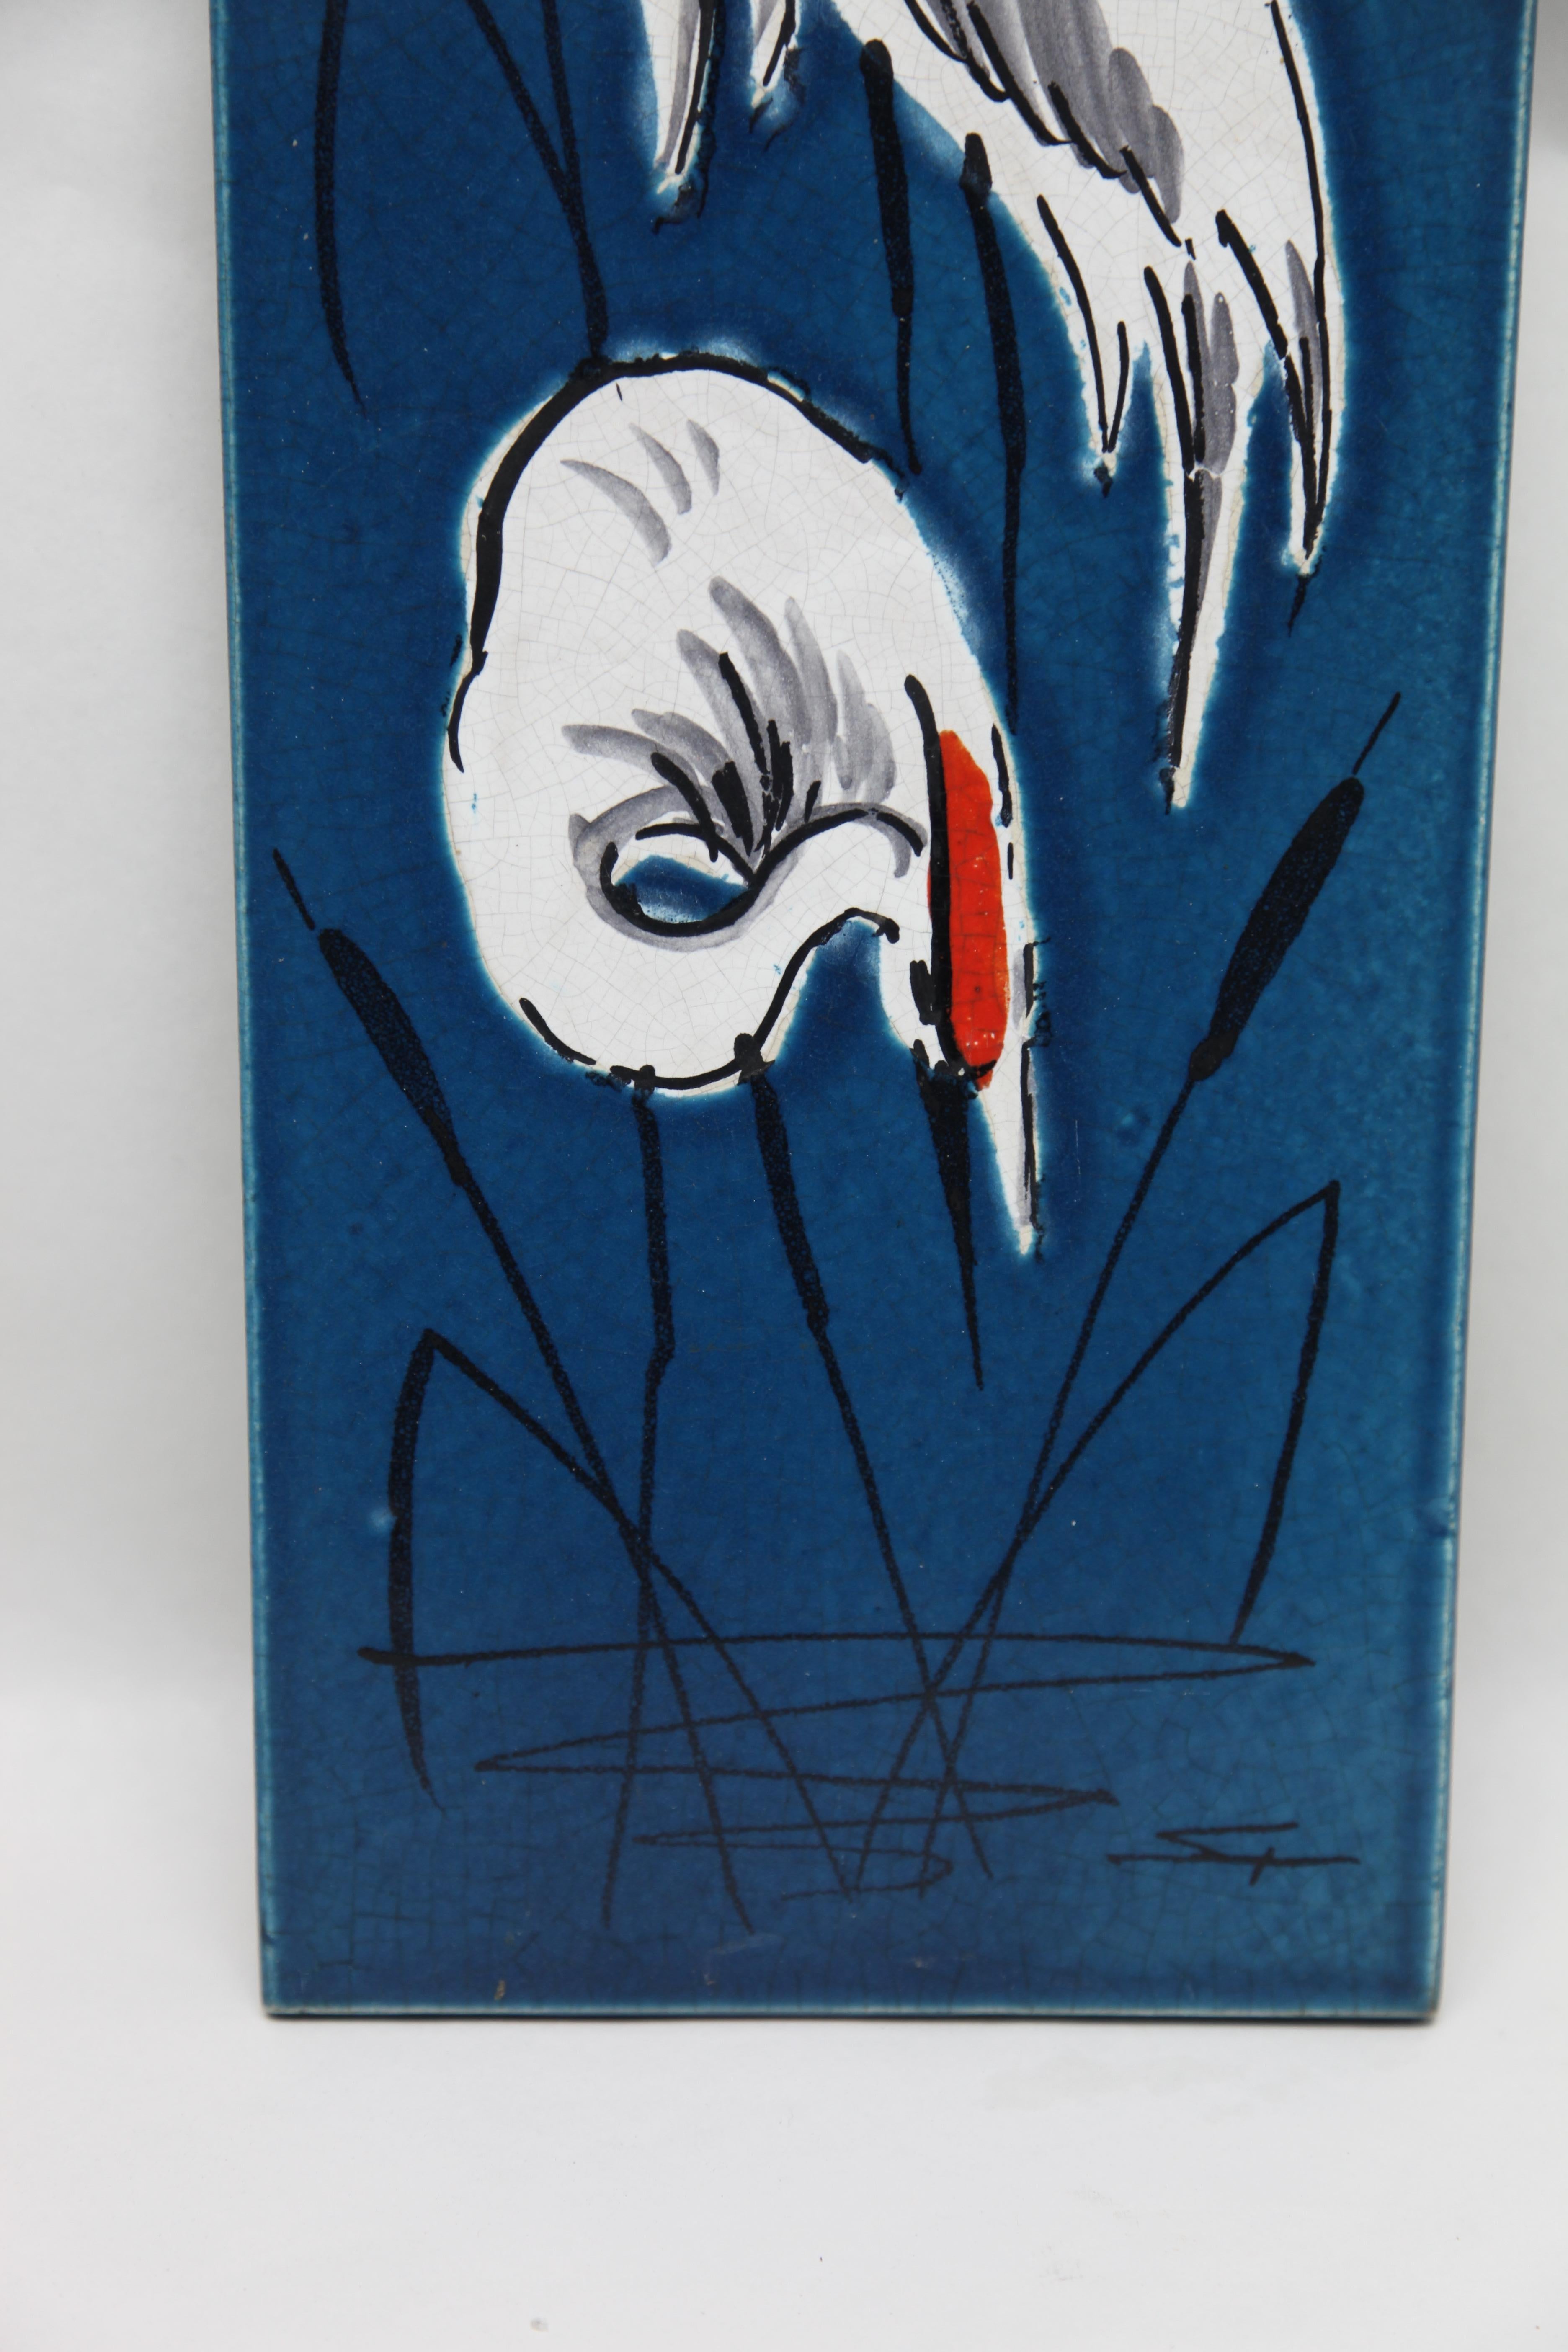 Rusha wall plaque, glazed ceramic, (Image of Cranes) West Germany 

Was produced in the 1960's 
handmade, and made in Germany. 
Very collectible. 

